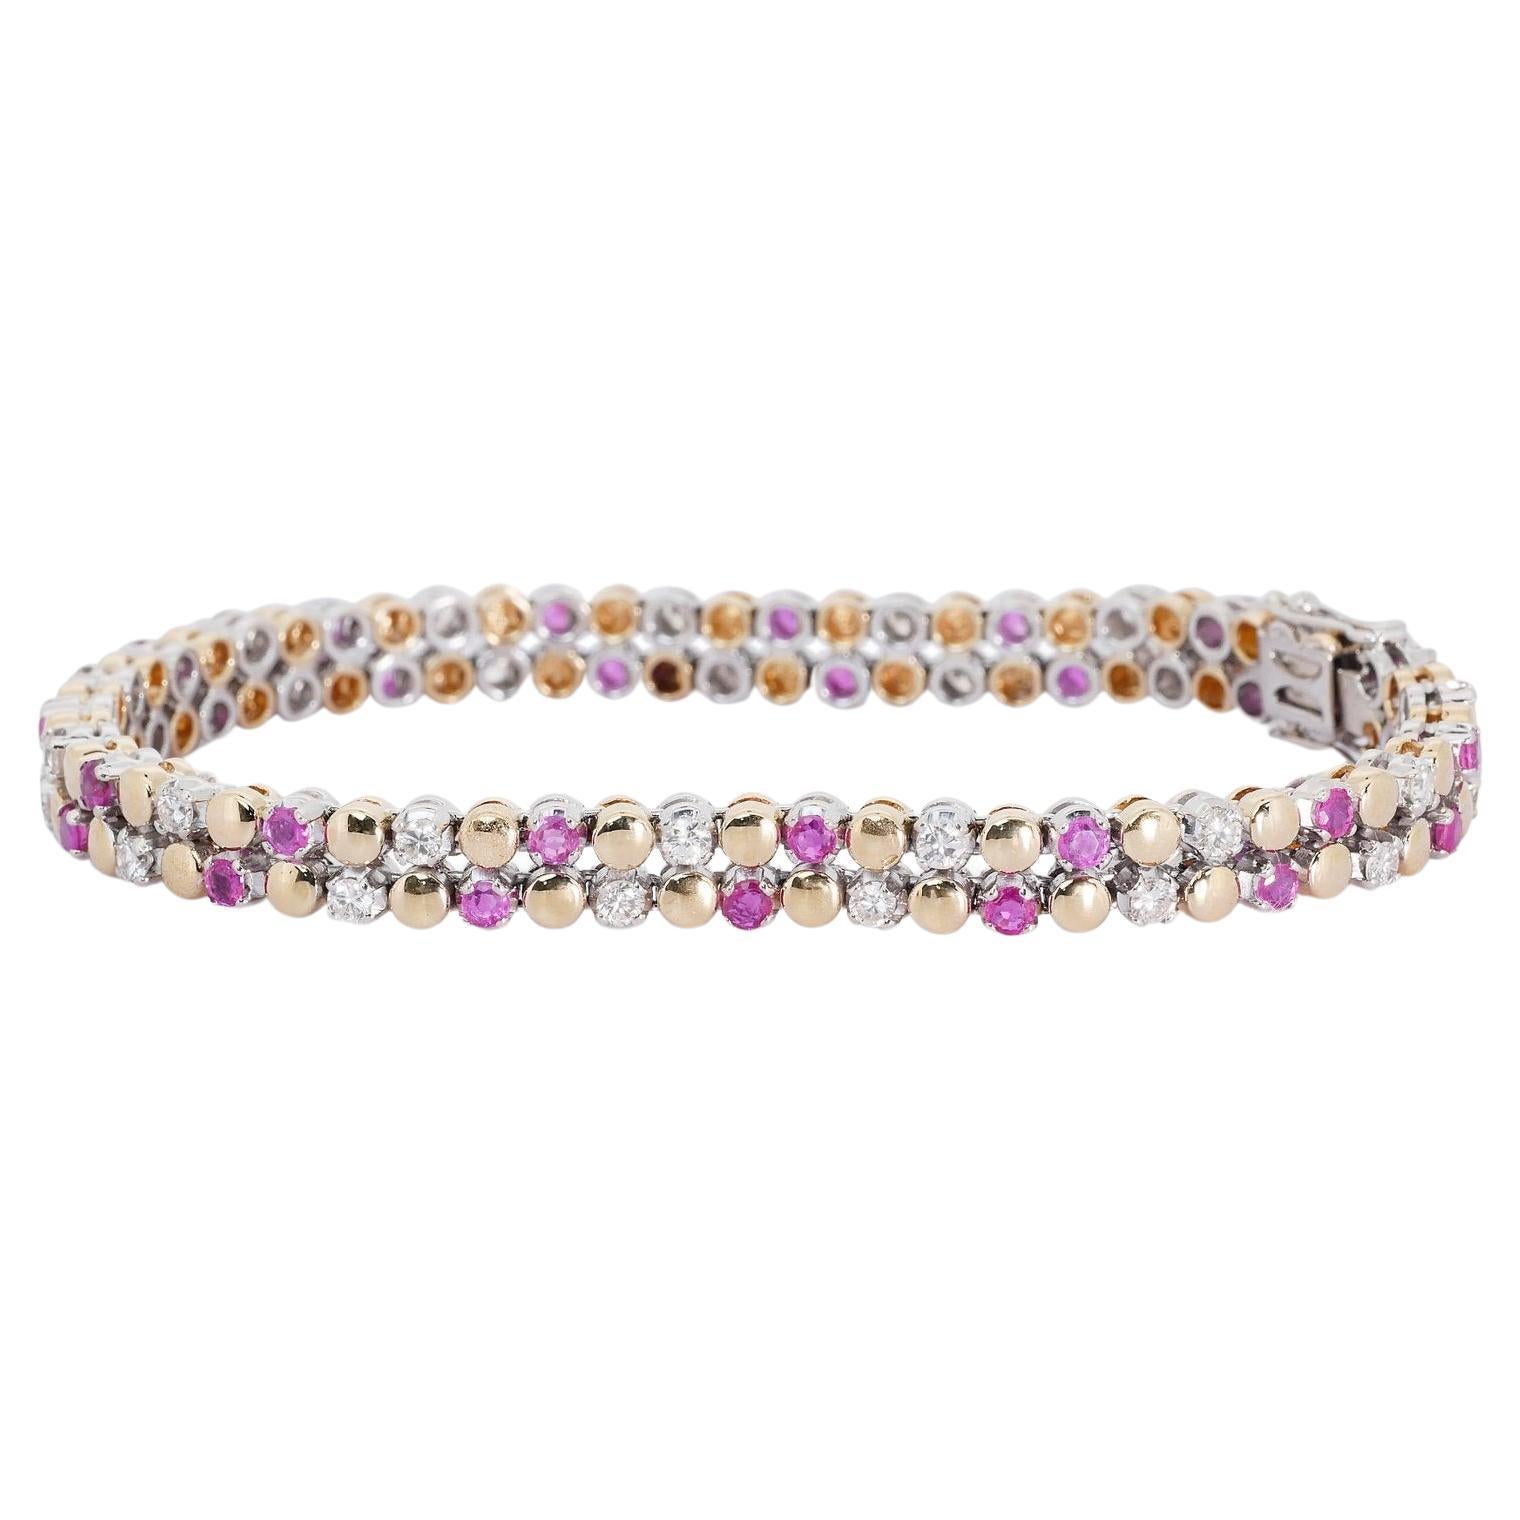 Colorful 18K White Gold Bracelet w/ 2.7 ct Ruby and Natural Diamonds IGI Cert For Sale